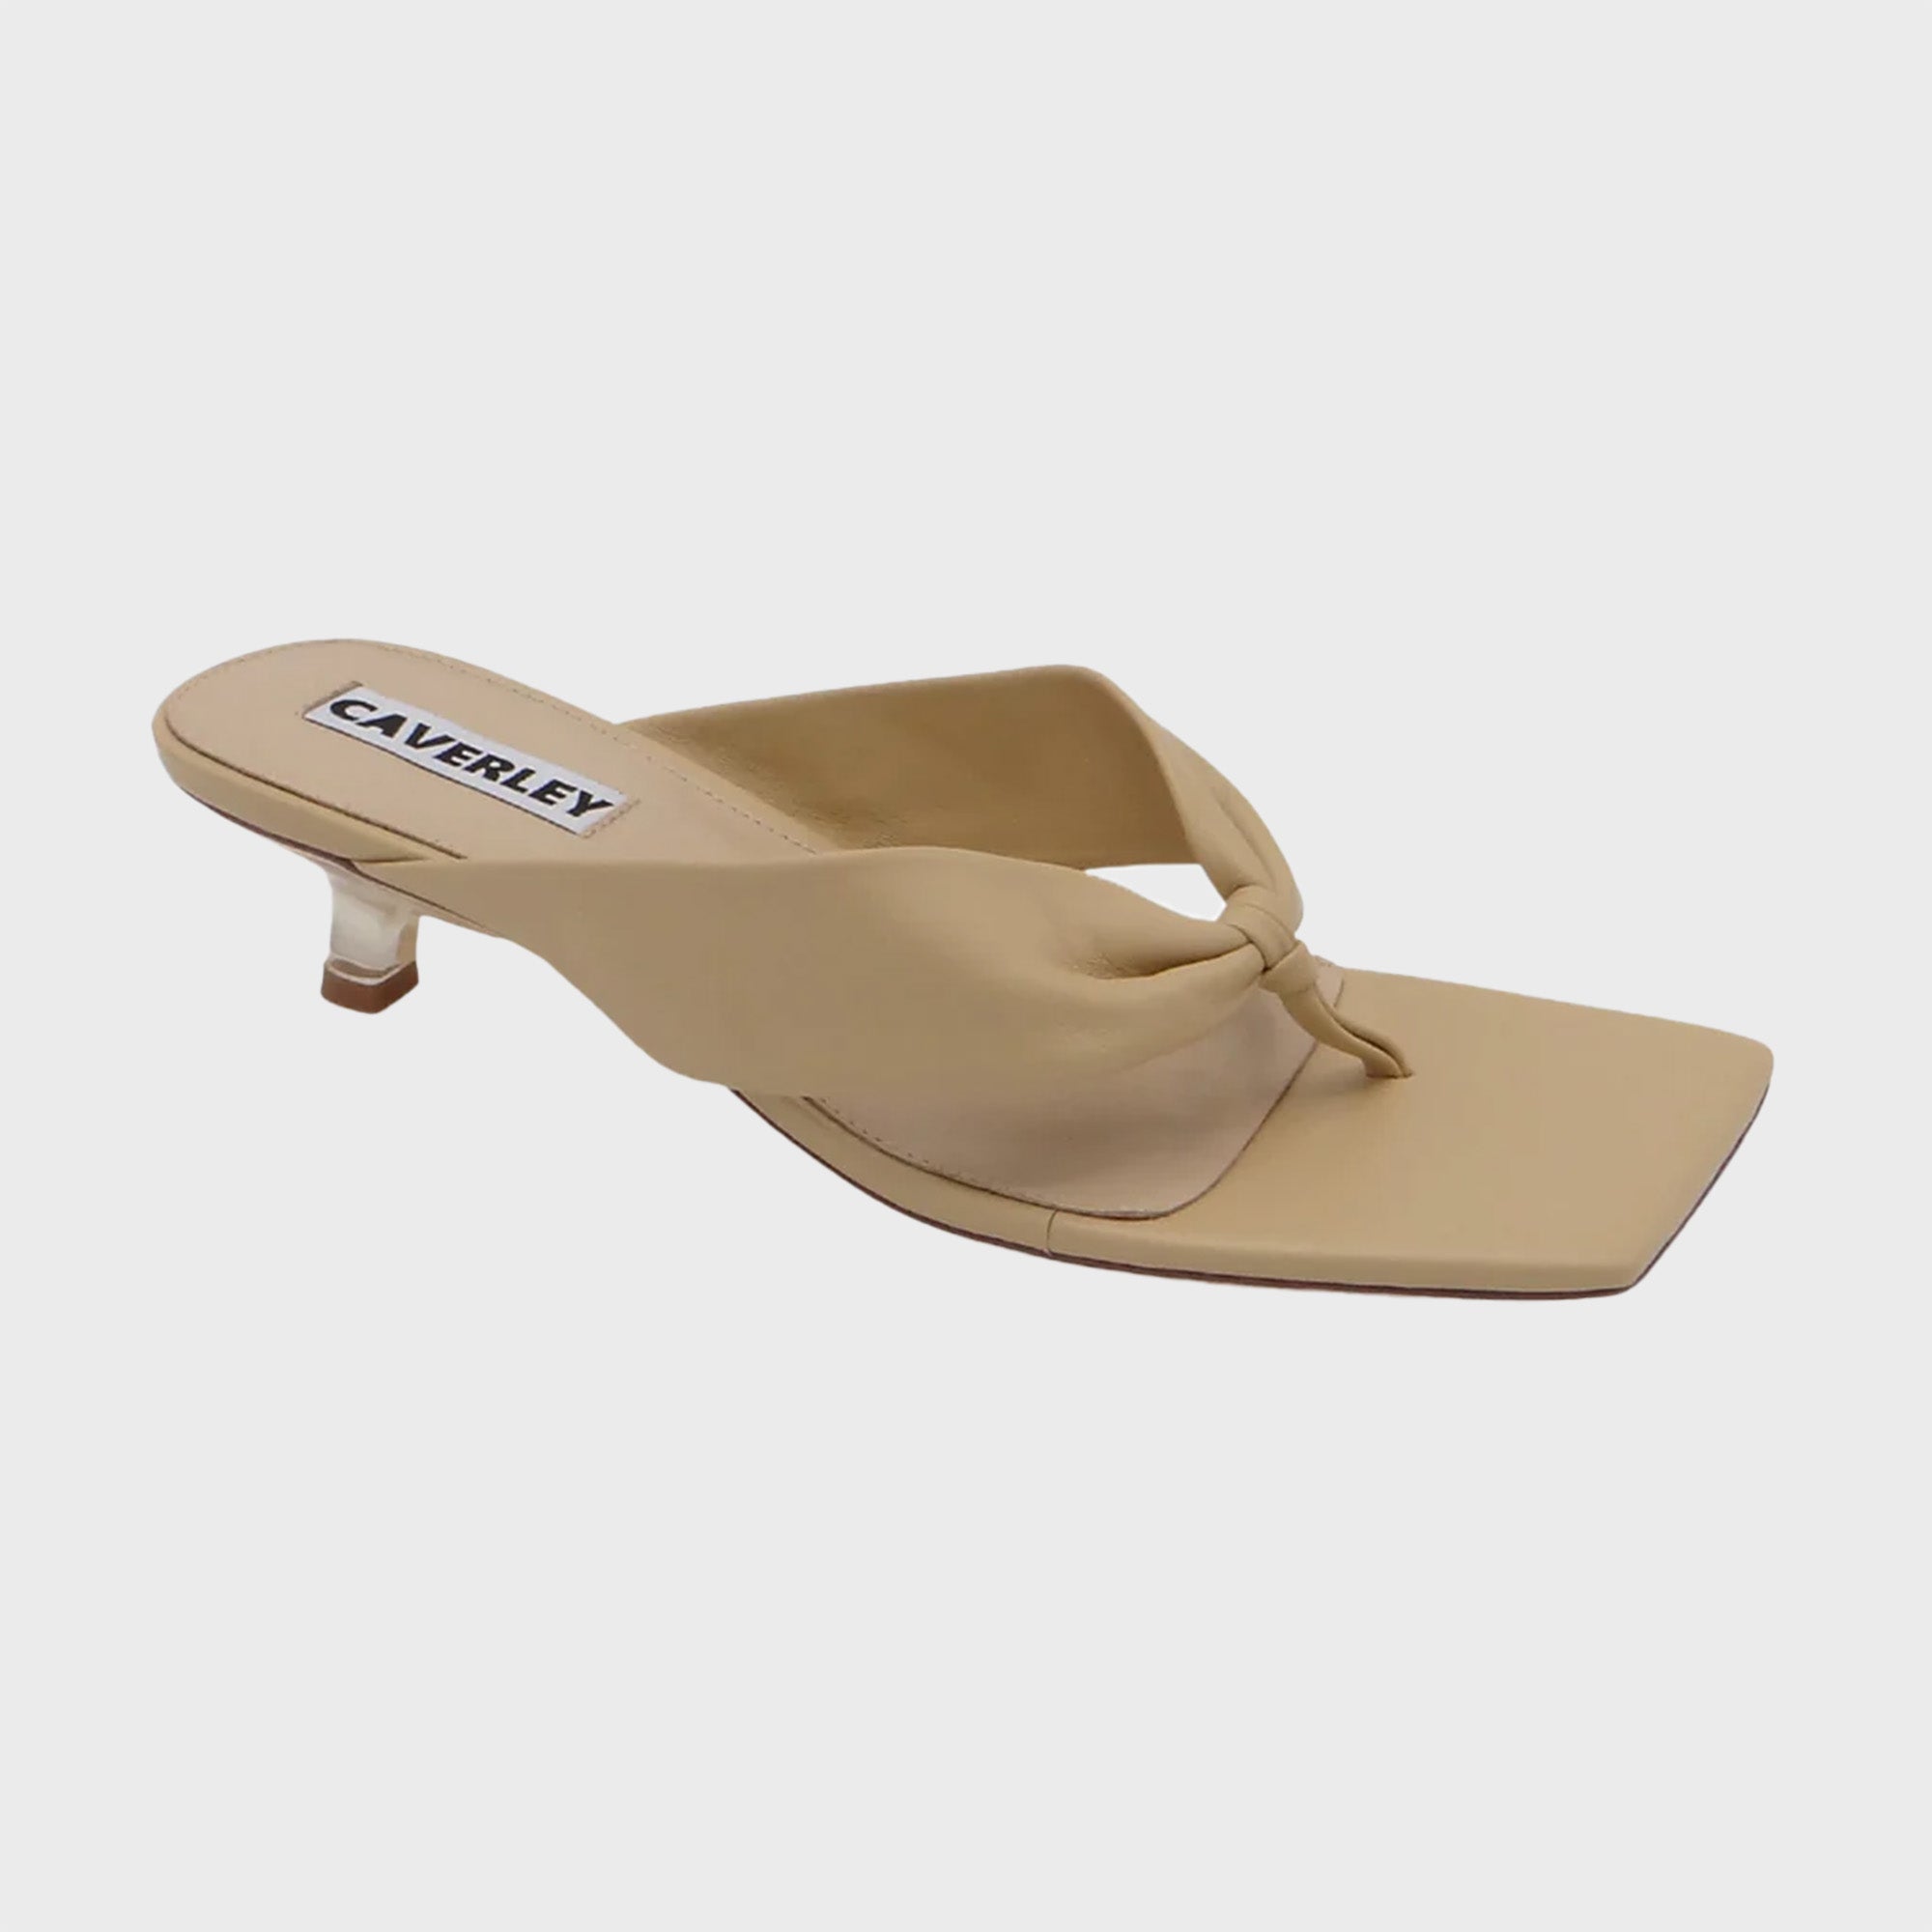 CAVERLEY Stella Mule in Light Tan 23S503C Light Tan FROM EIGHTYWINGOLD - OFFICIAL BRAND PARTNER